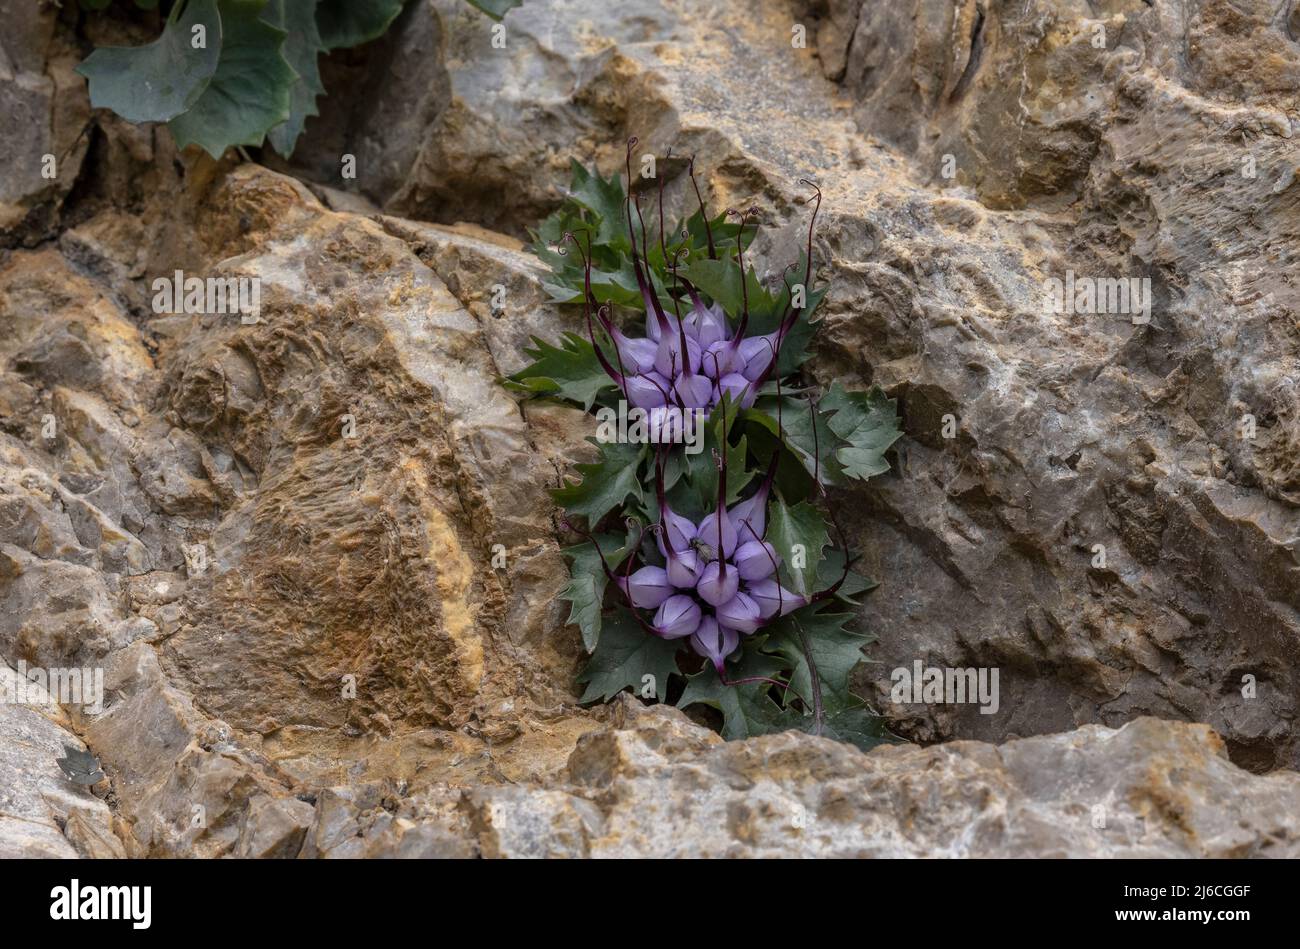 Devil's Claw, Physoplexis comosa in flower in rock-crevice, in the Dolomites. Italy. Stock Photo